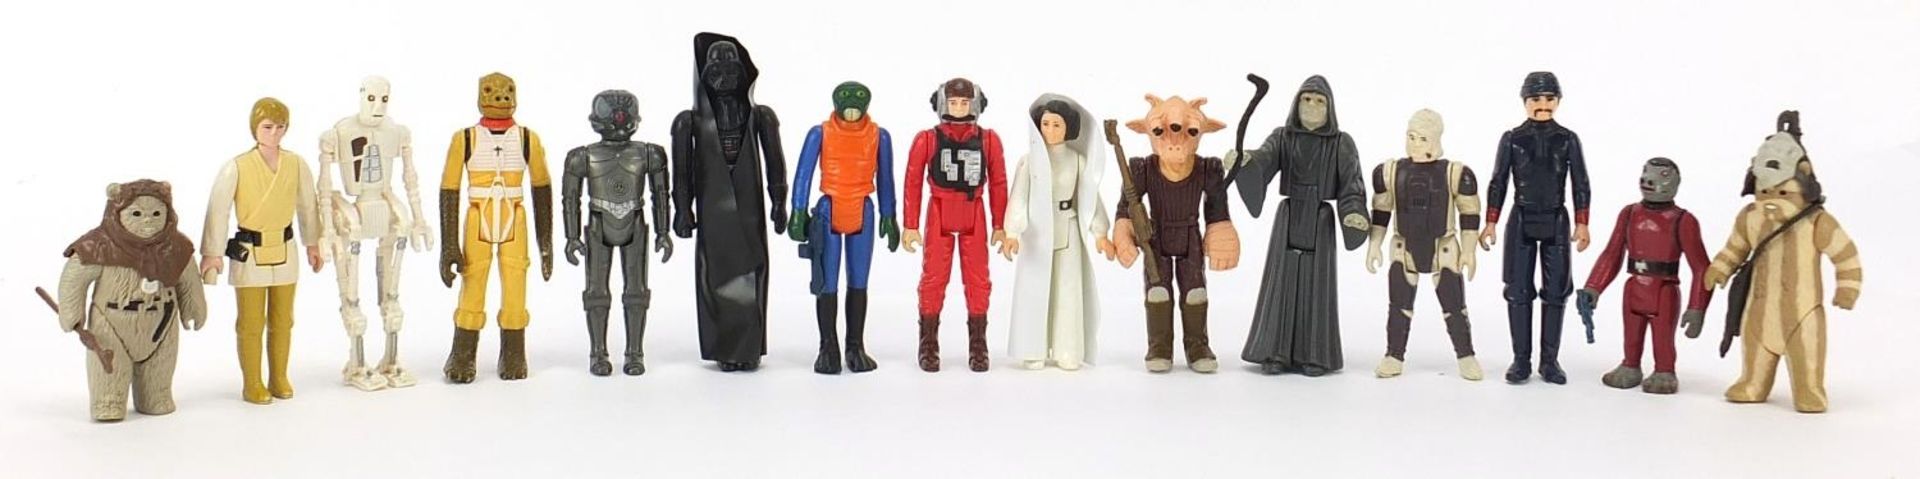 Fifteen vintage Star Wars action figures with accessories including Walrus man, Darth Vader, Luke